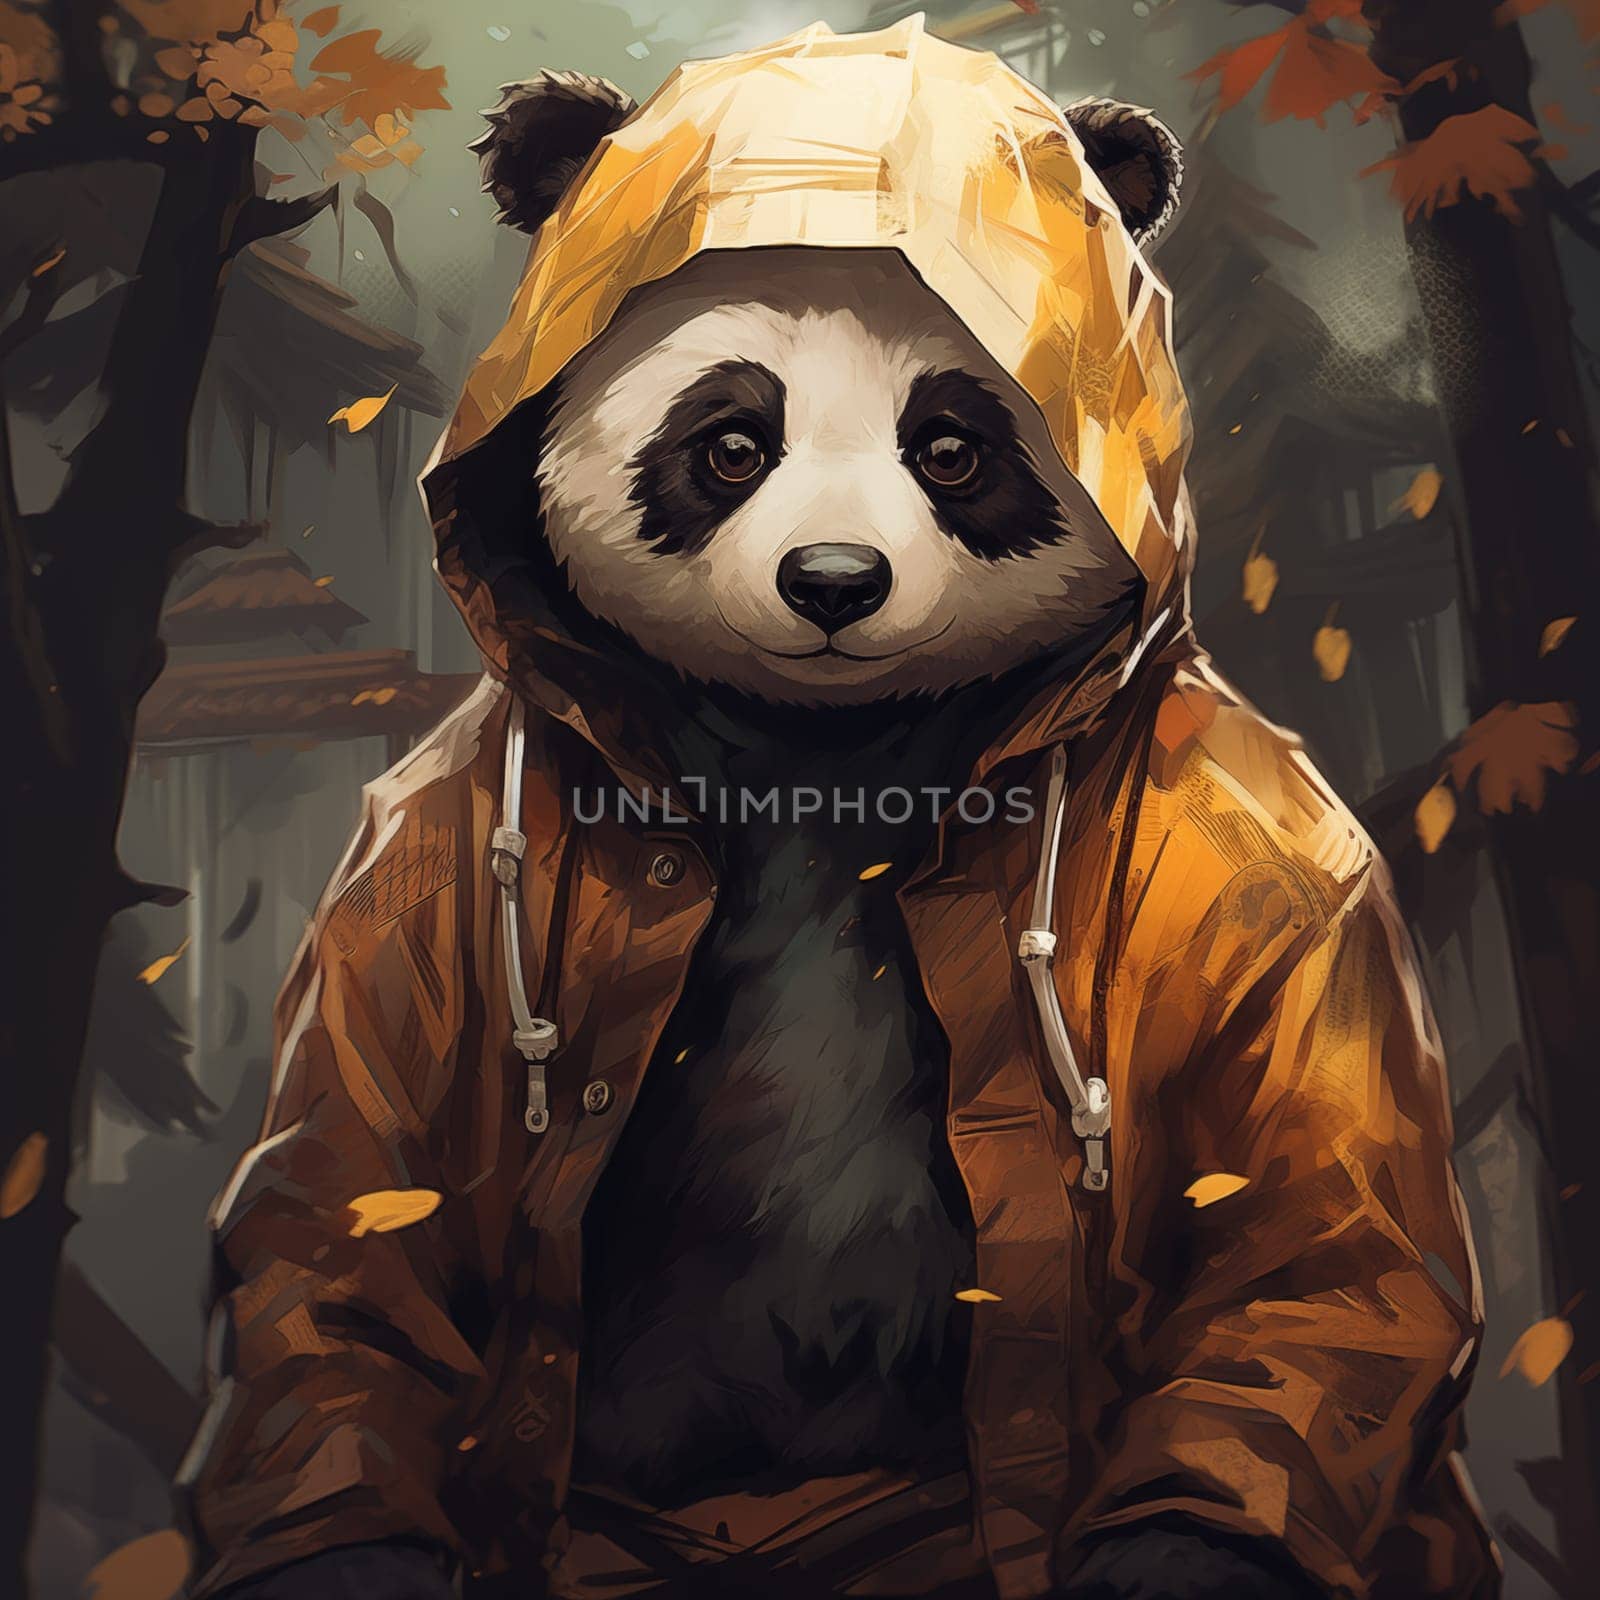 Illustration of a Panda in Yellow Raincoat. Dark Autumn Forest on Background.